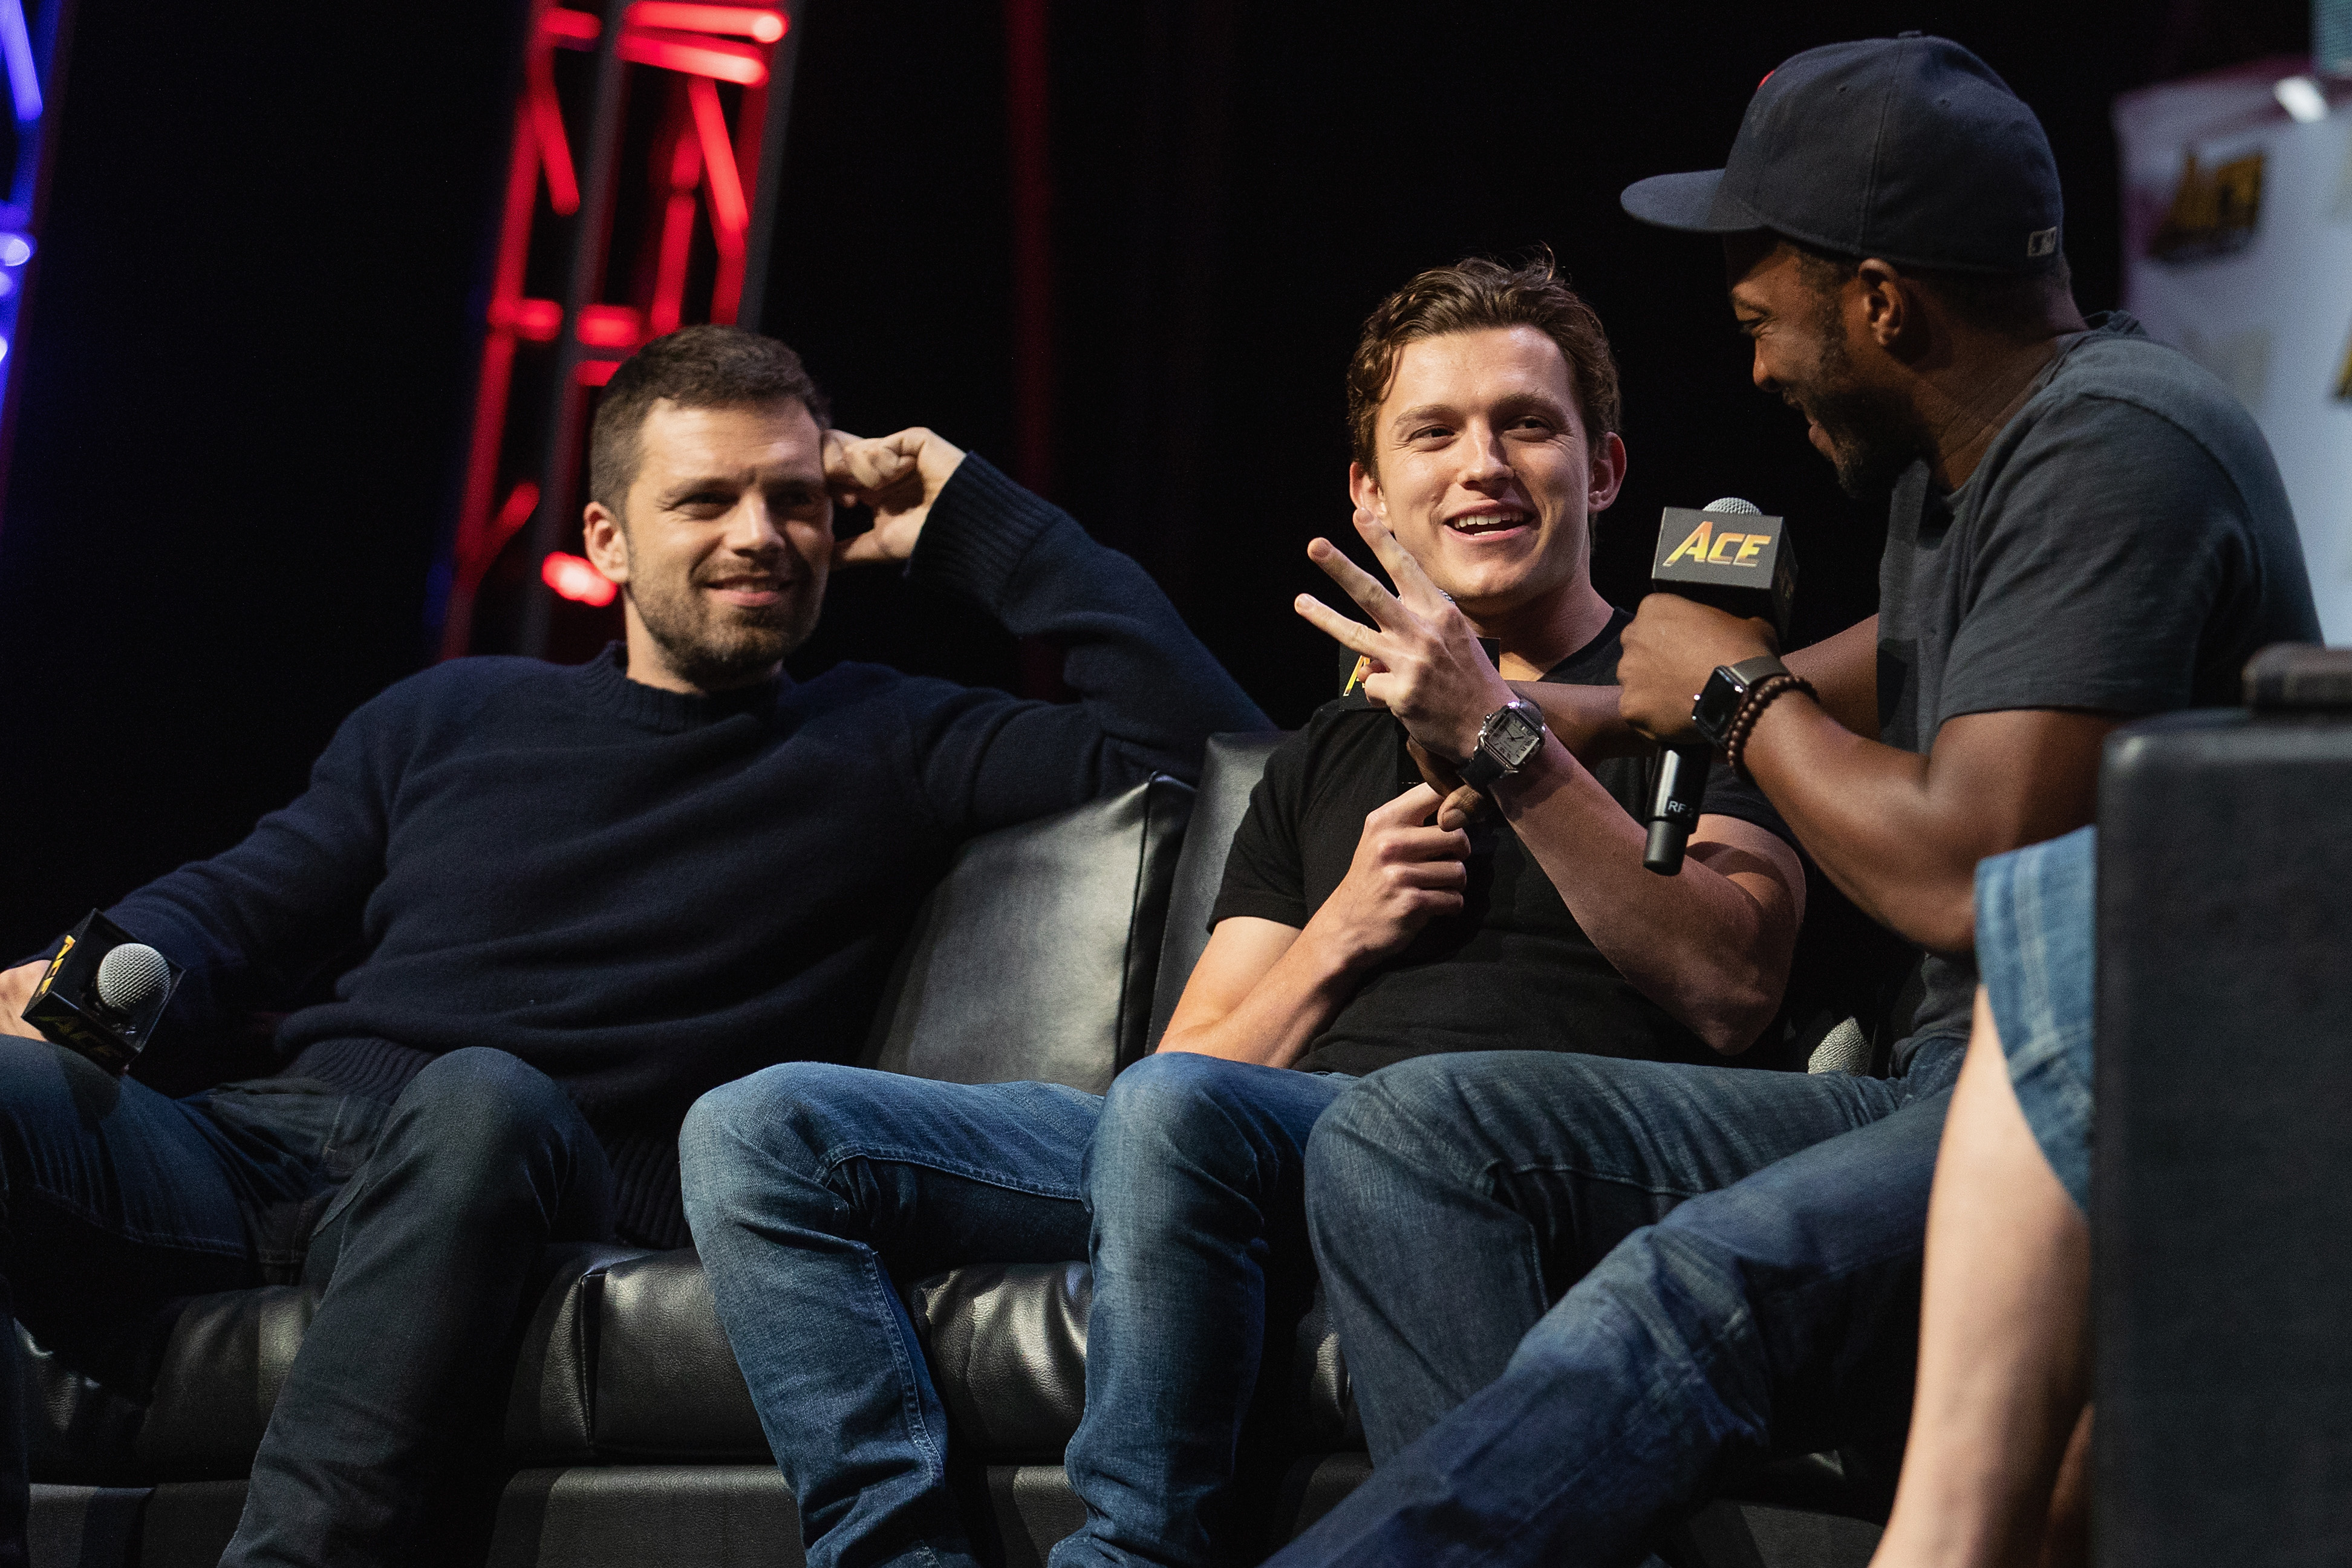 'The Falcon and the Winter Soldier' stars Sebastian Stan and Anthony Mackie speak onstage during a convention with Tom Holland. Stan wears a dark blue sweater and jeans. Holland wears a black shirt and jeans. Mackie wears a dark gray shirt, jeans, and a black baseball cap.